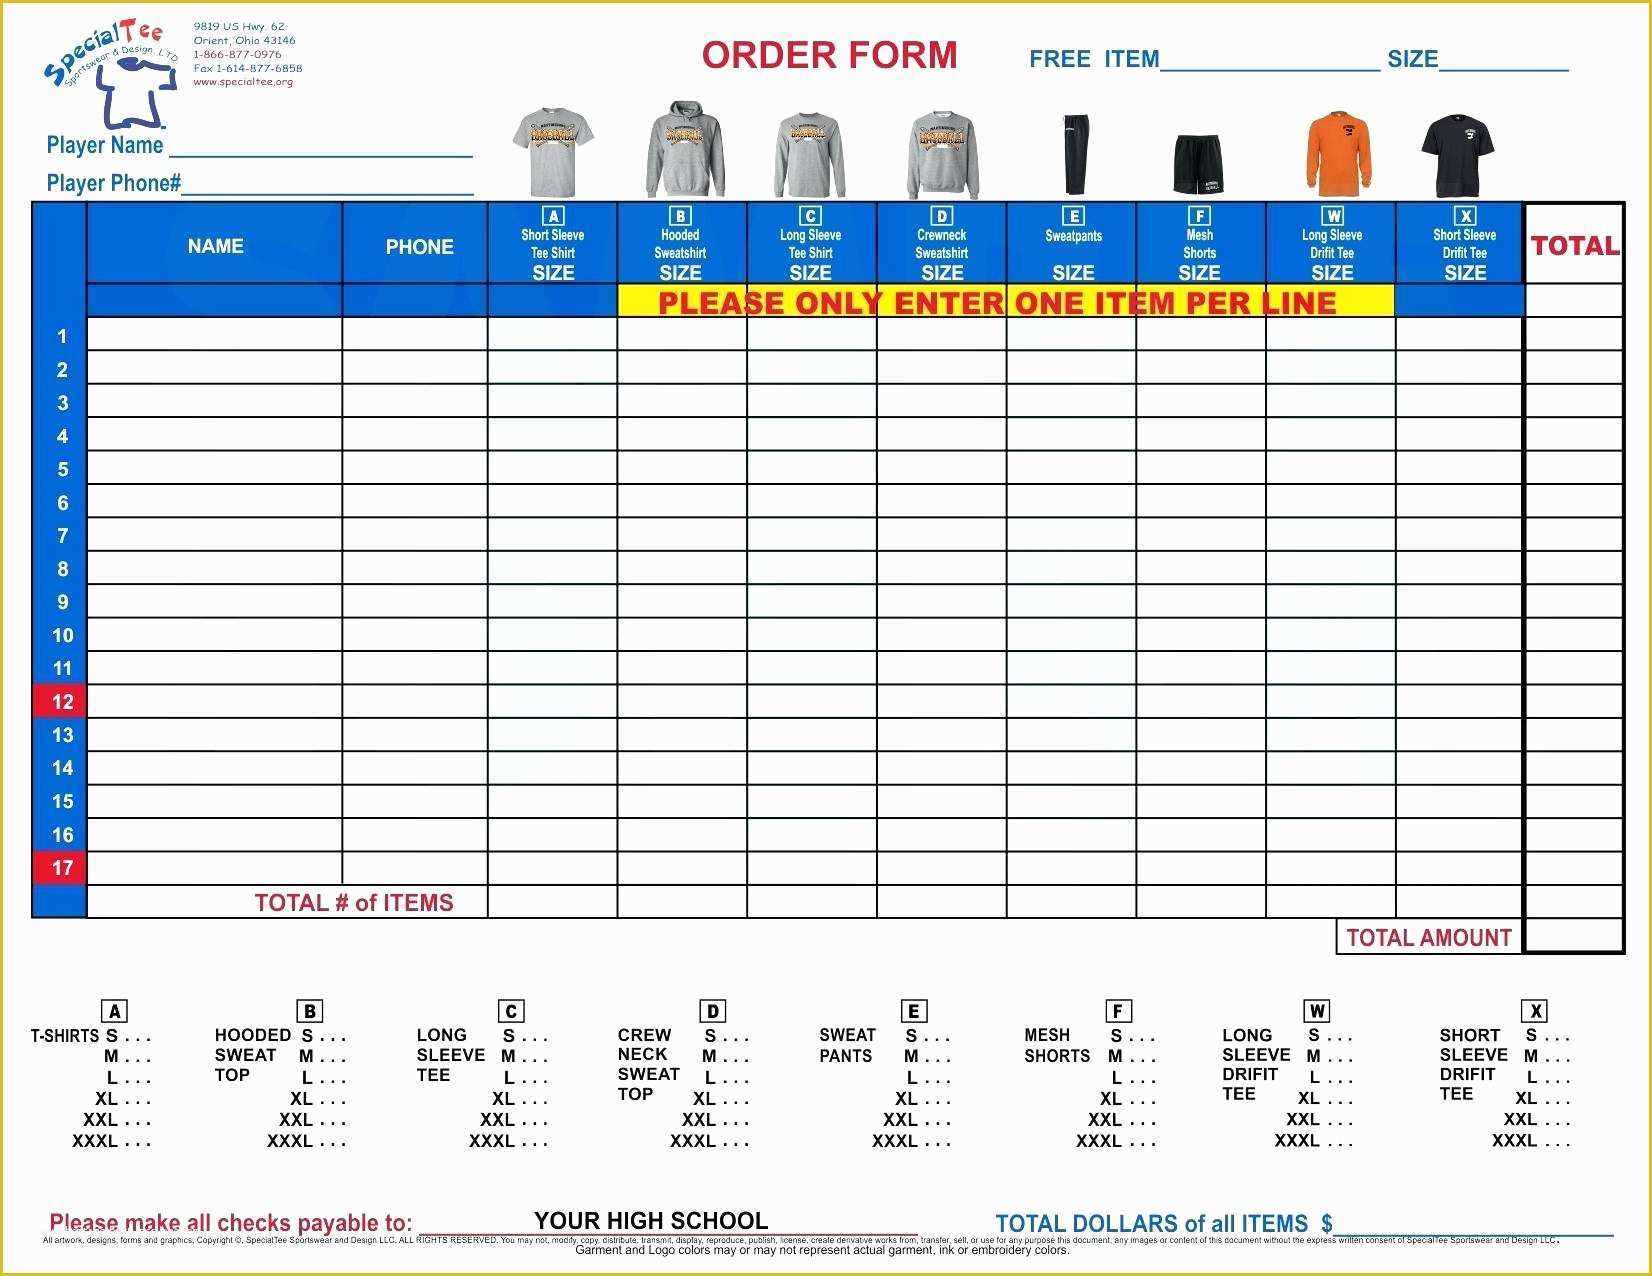 Whmcs order form Templates Free Of Whmcs order form Templates – Radiofama